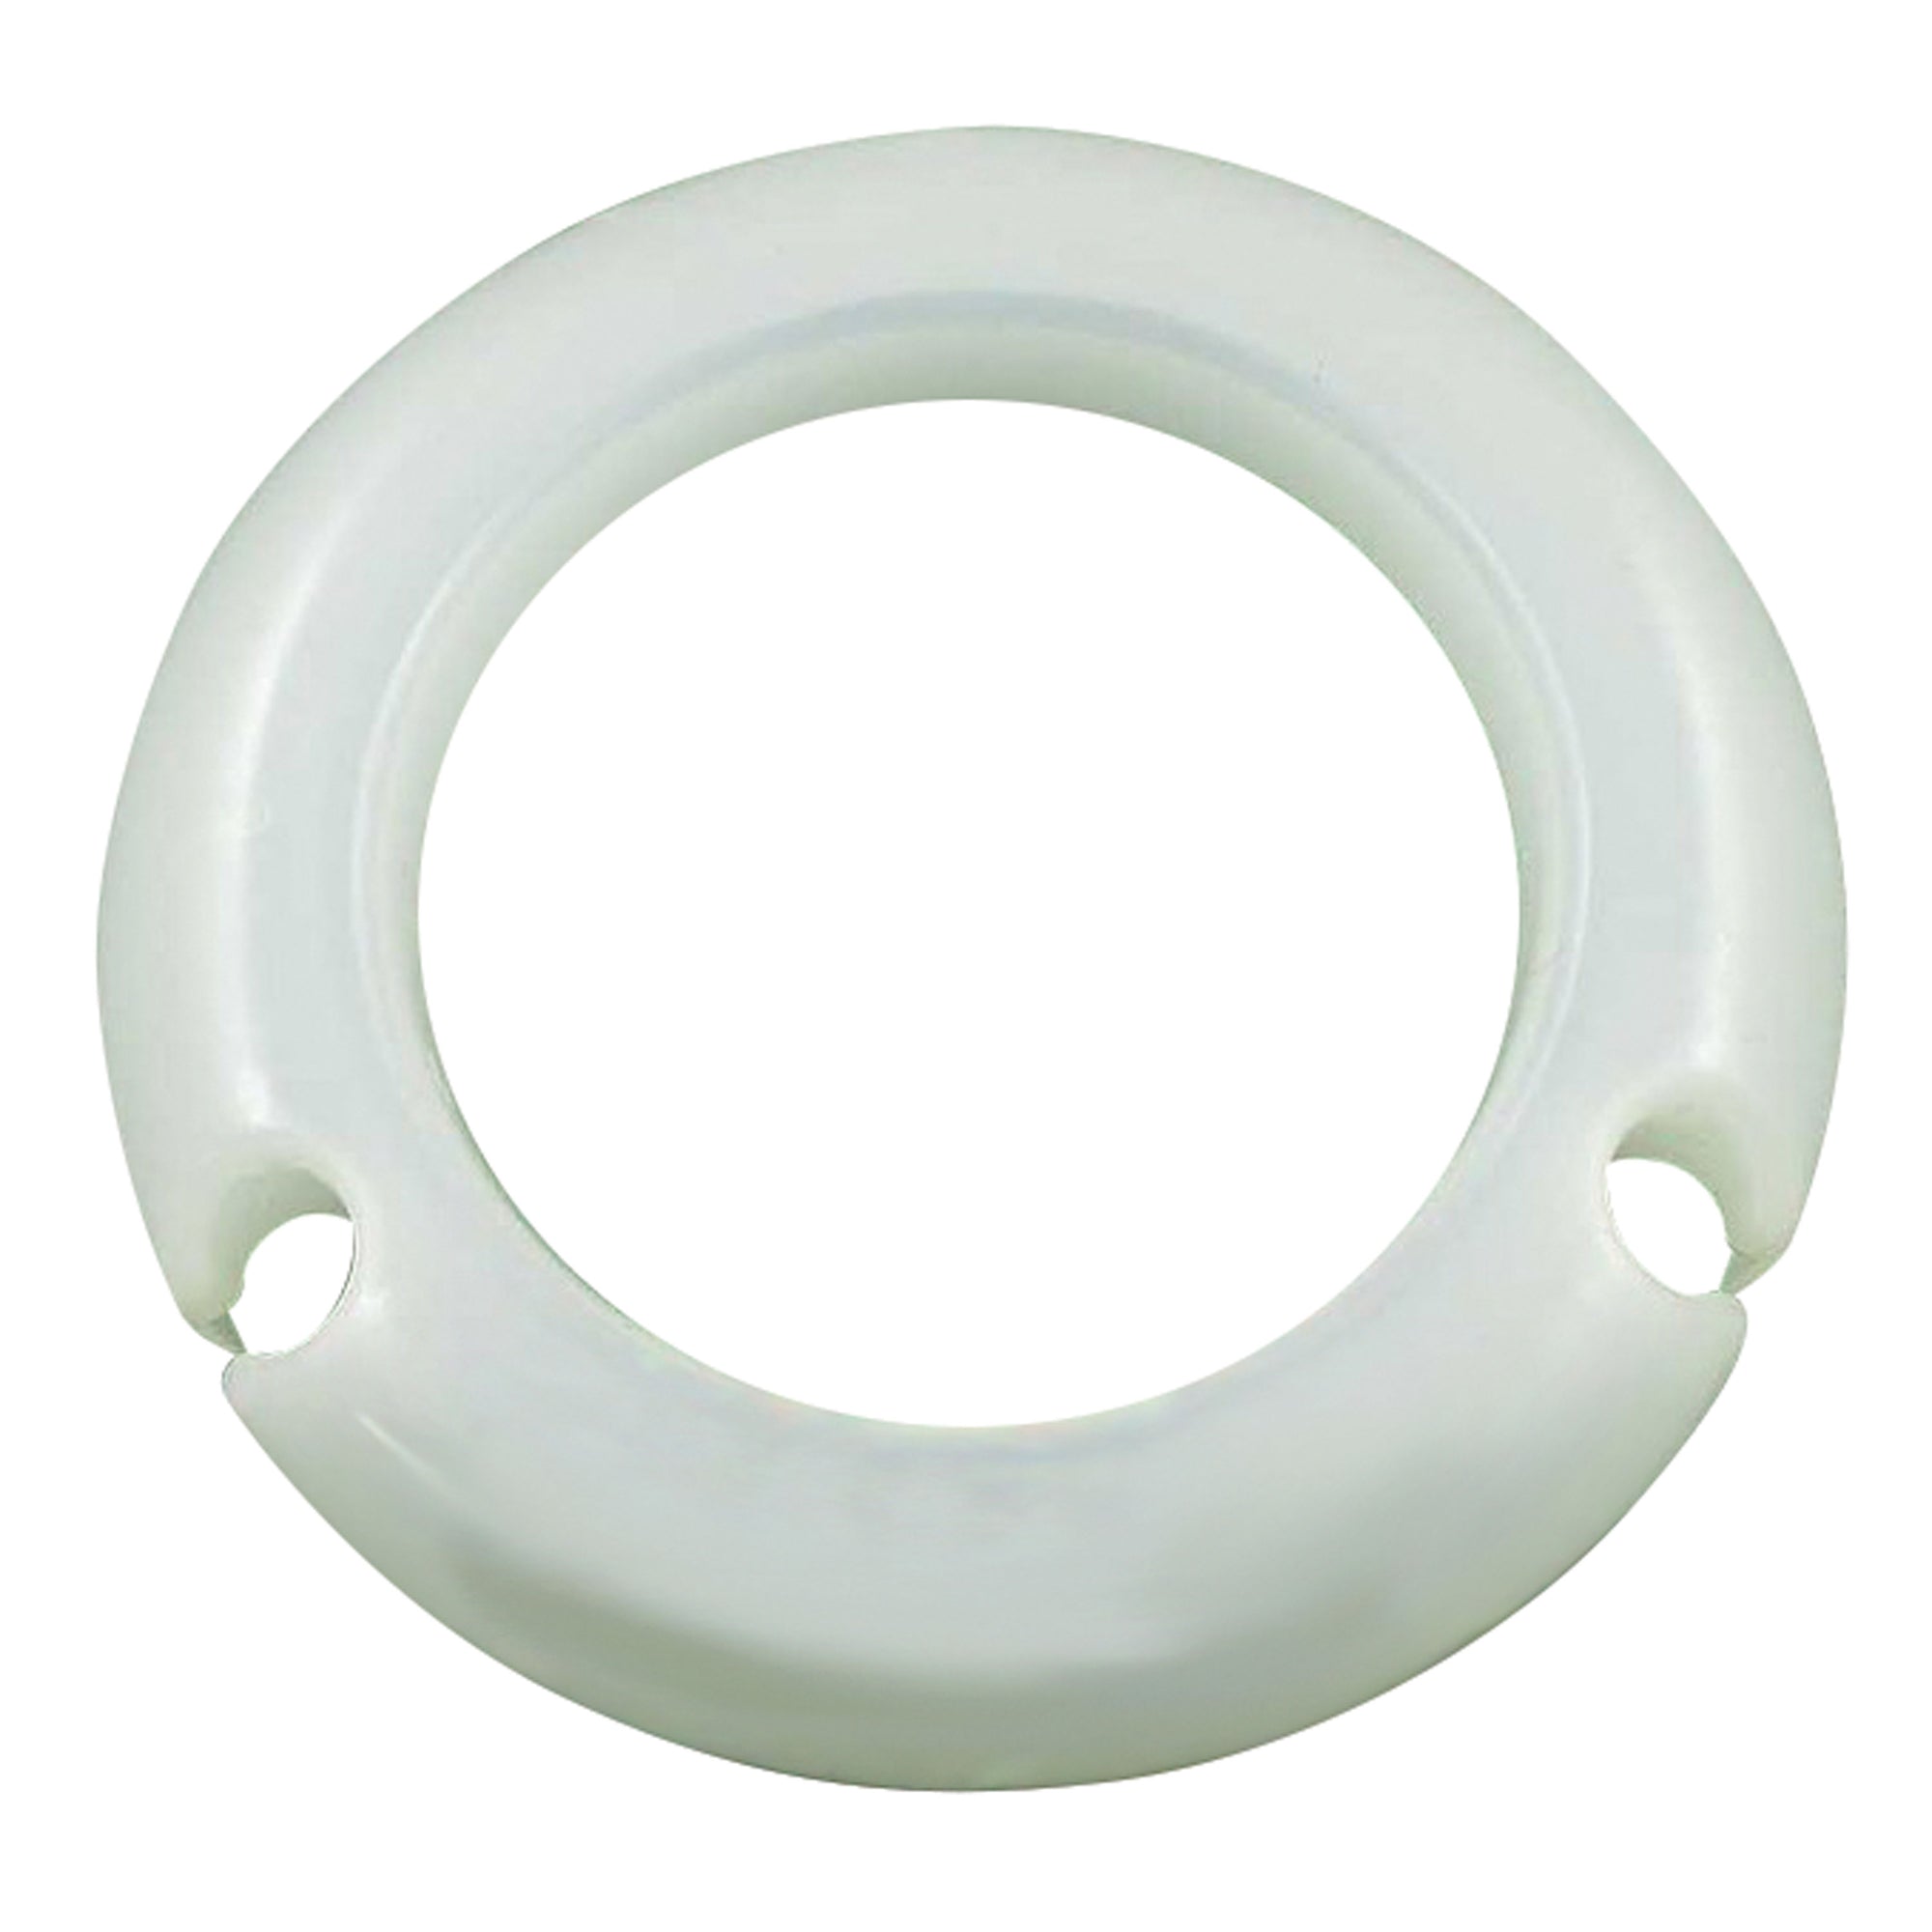 Dometic 3313115.020 Guide End Cap Fabric